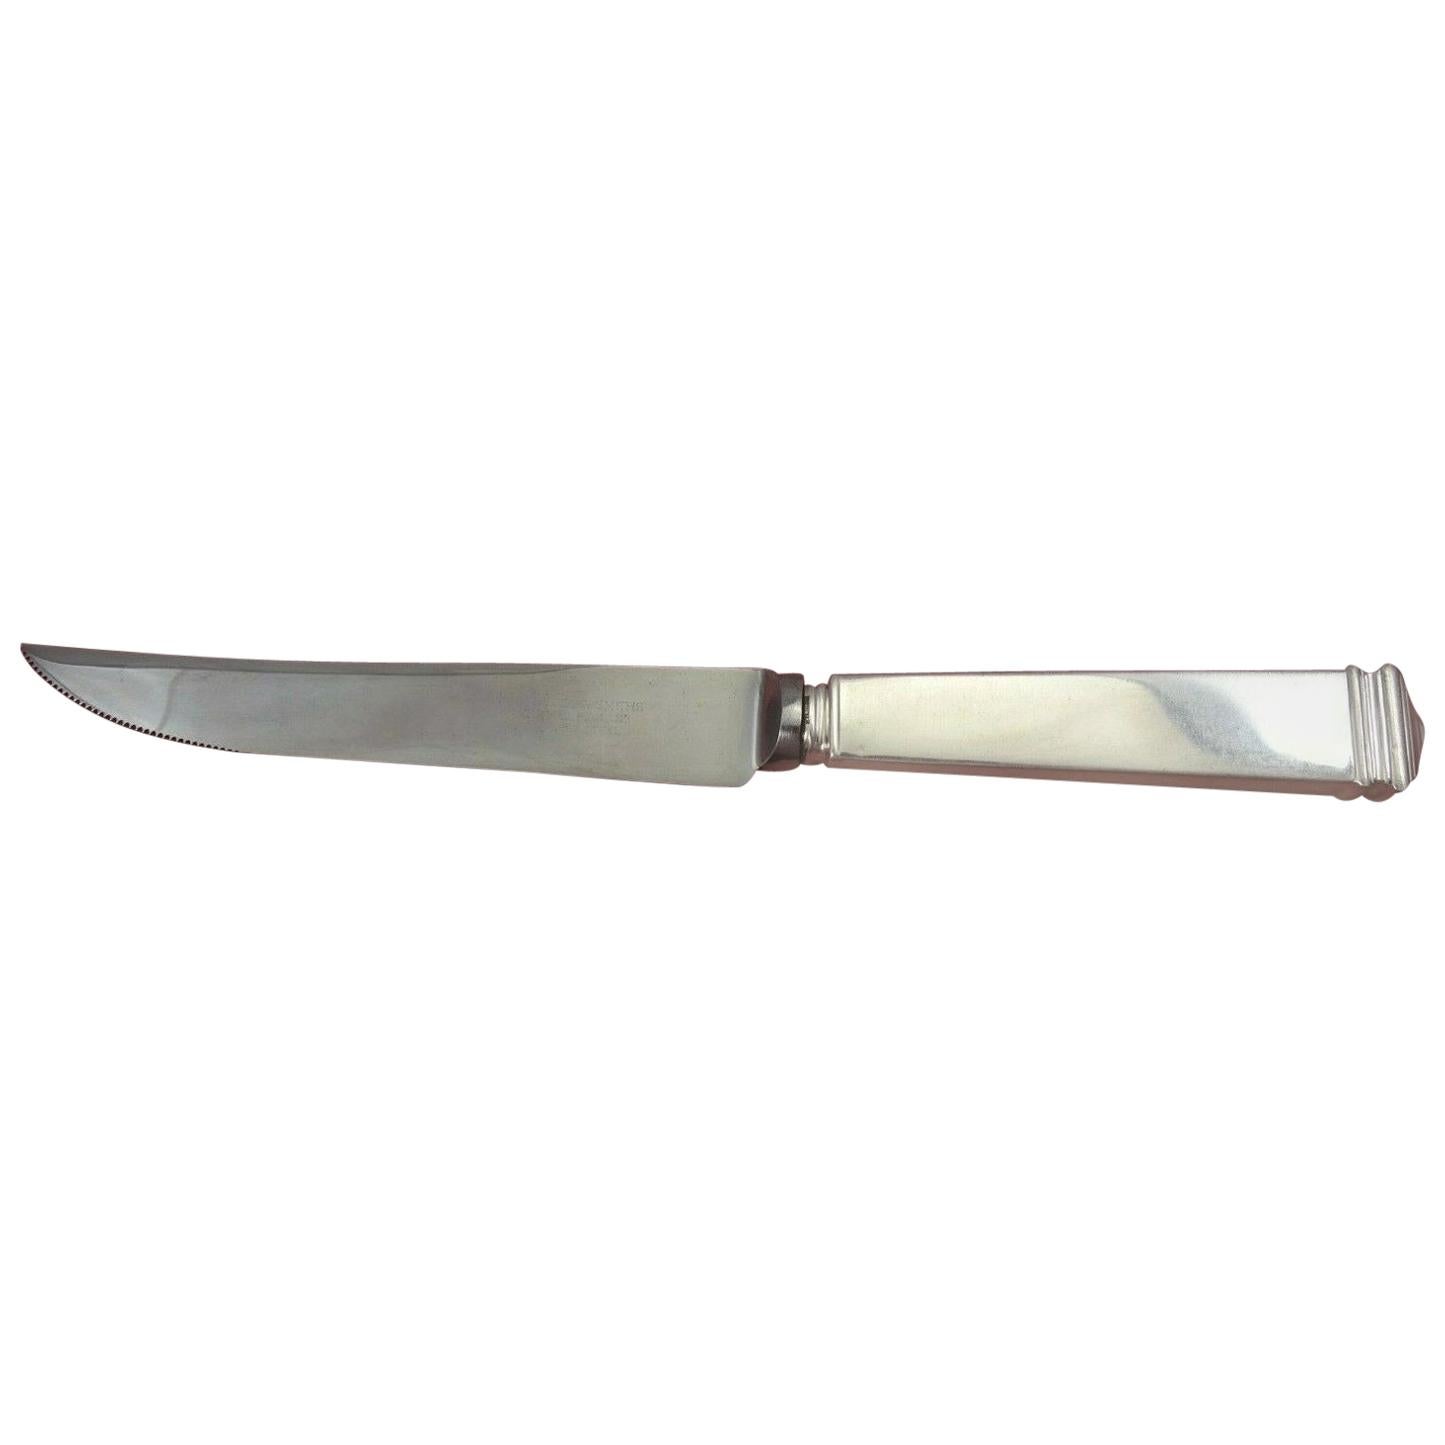 Hampton by Tiffany and Co Sterling Silver Steak Knife Not Tiffany Blade